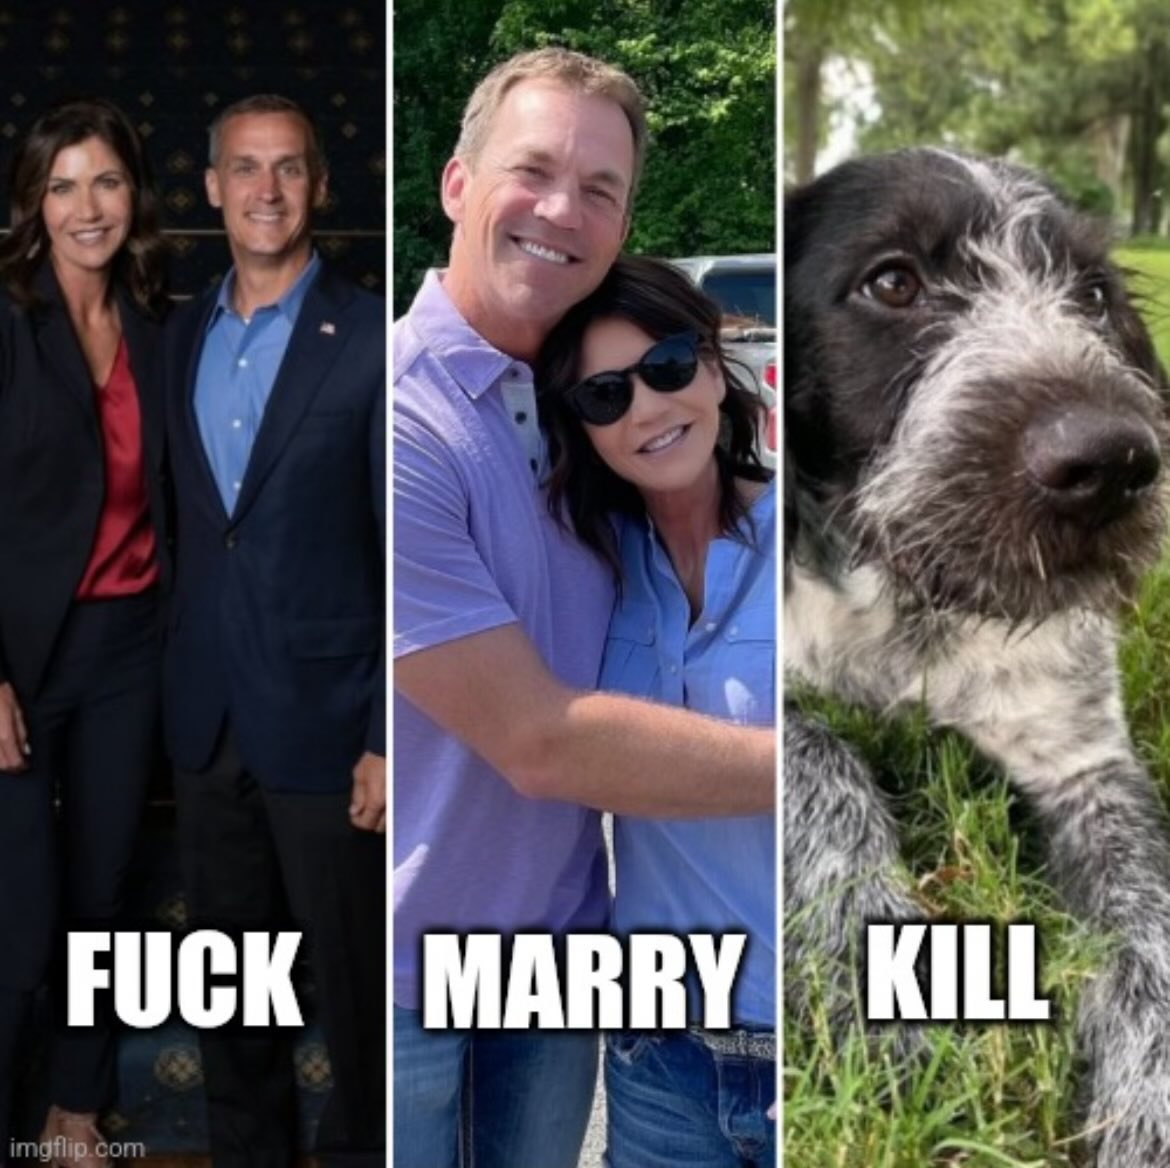 Serious question for you Kristi

What the fuck is wrong with your mind?
1) you idolize asshole Donald Trump
2) you think killing a puppy is justified

You are a sick fvck! Karma is coming for you! 

#KristiNoem #KristiNoemIsAMonster #KristiNoemPsychopath 

@KristiNoem